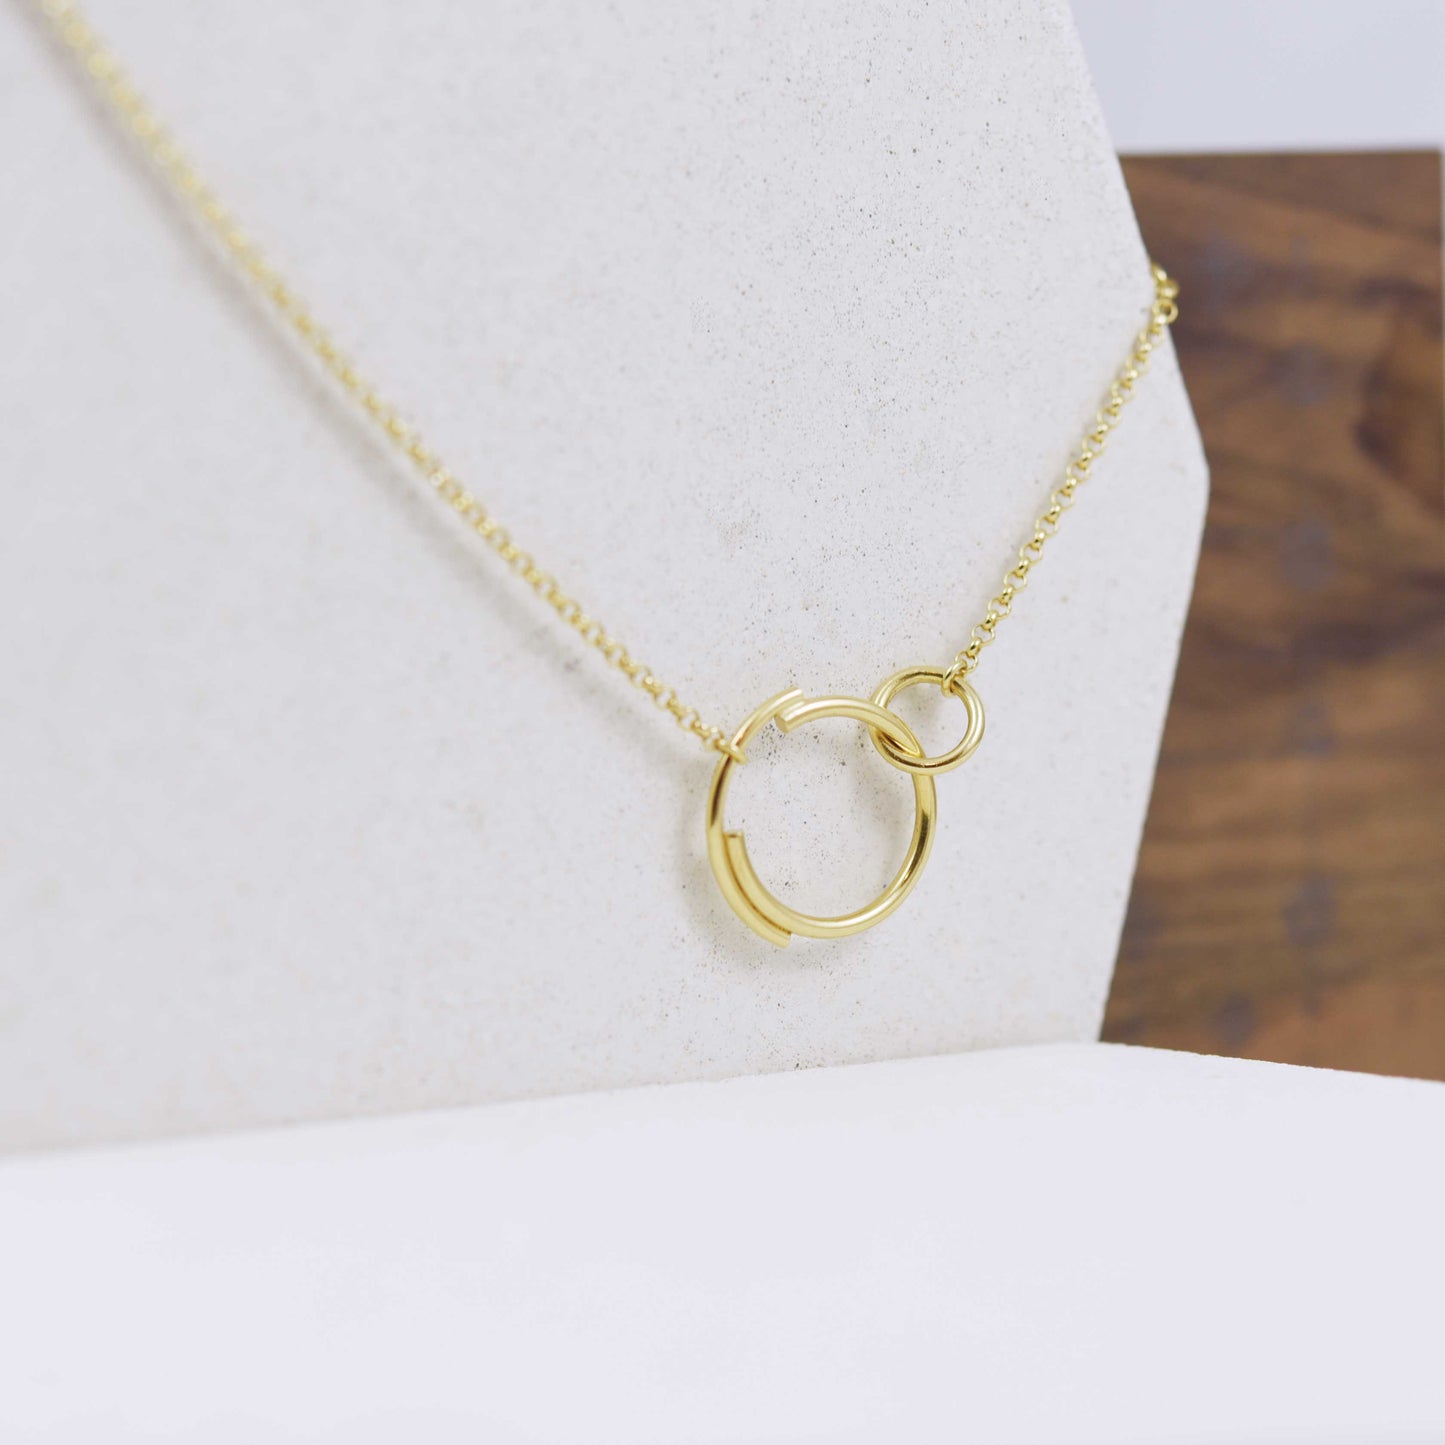 A close up of a stylish interlocking circle necklace  in gold that features a small circle clasping onto a larger circle that is made up of two separate arcs for a truly eclectic design.